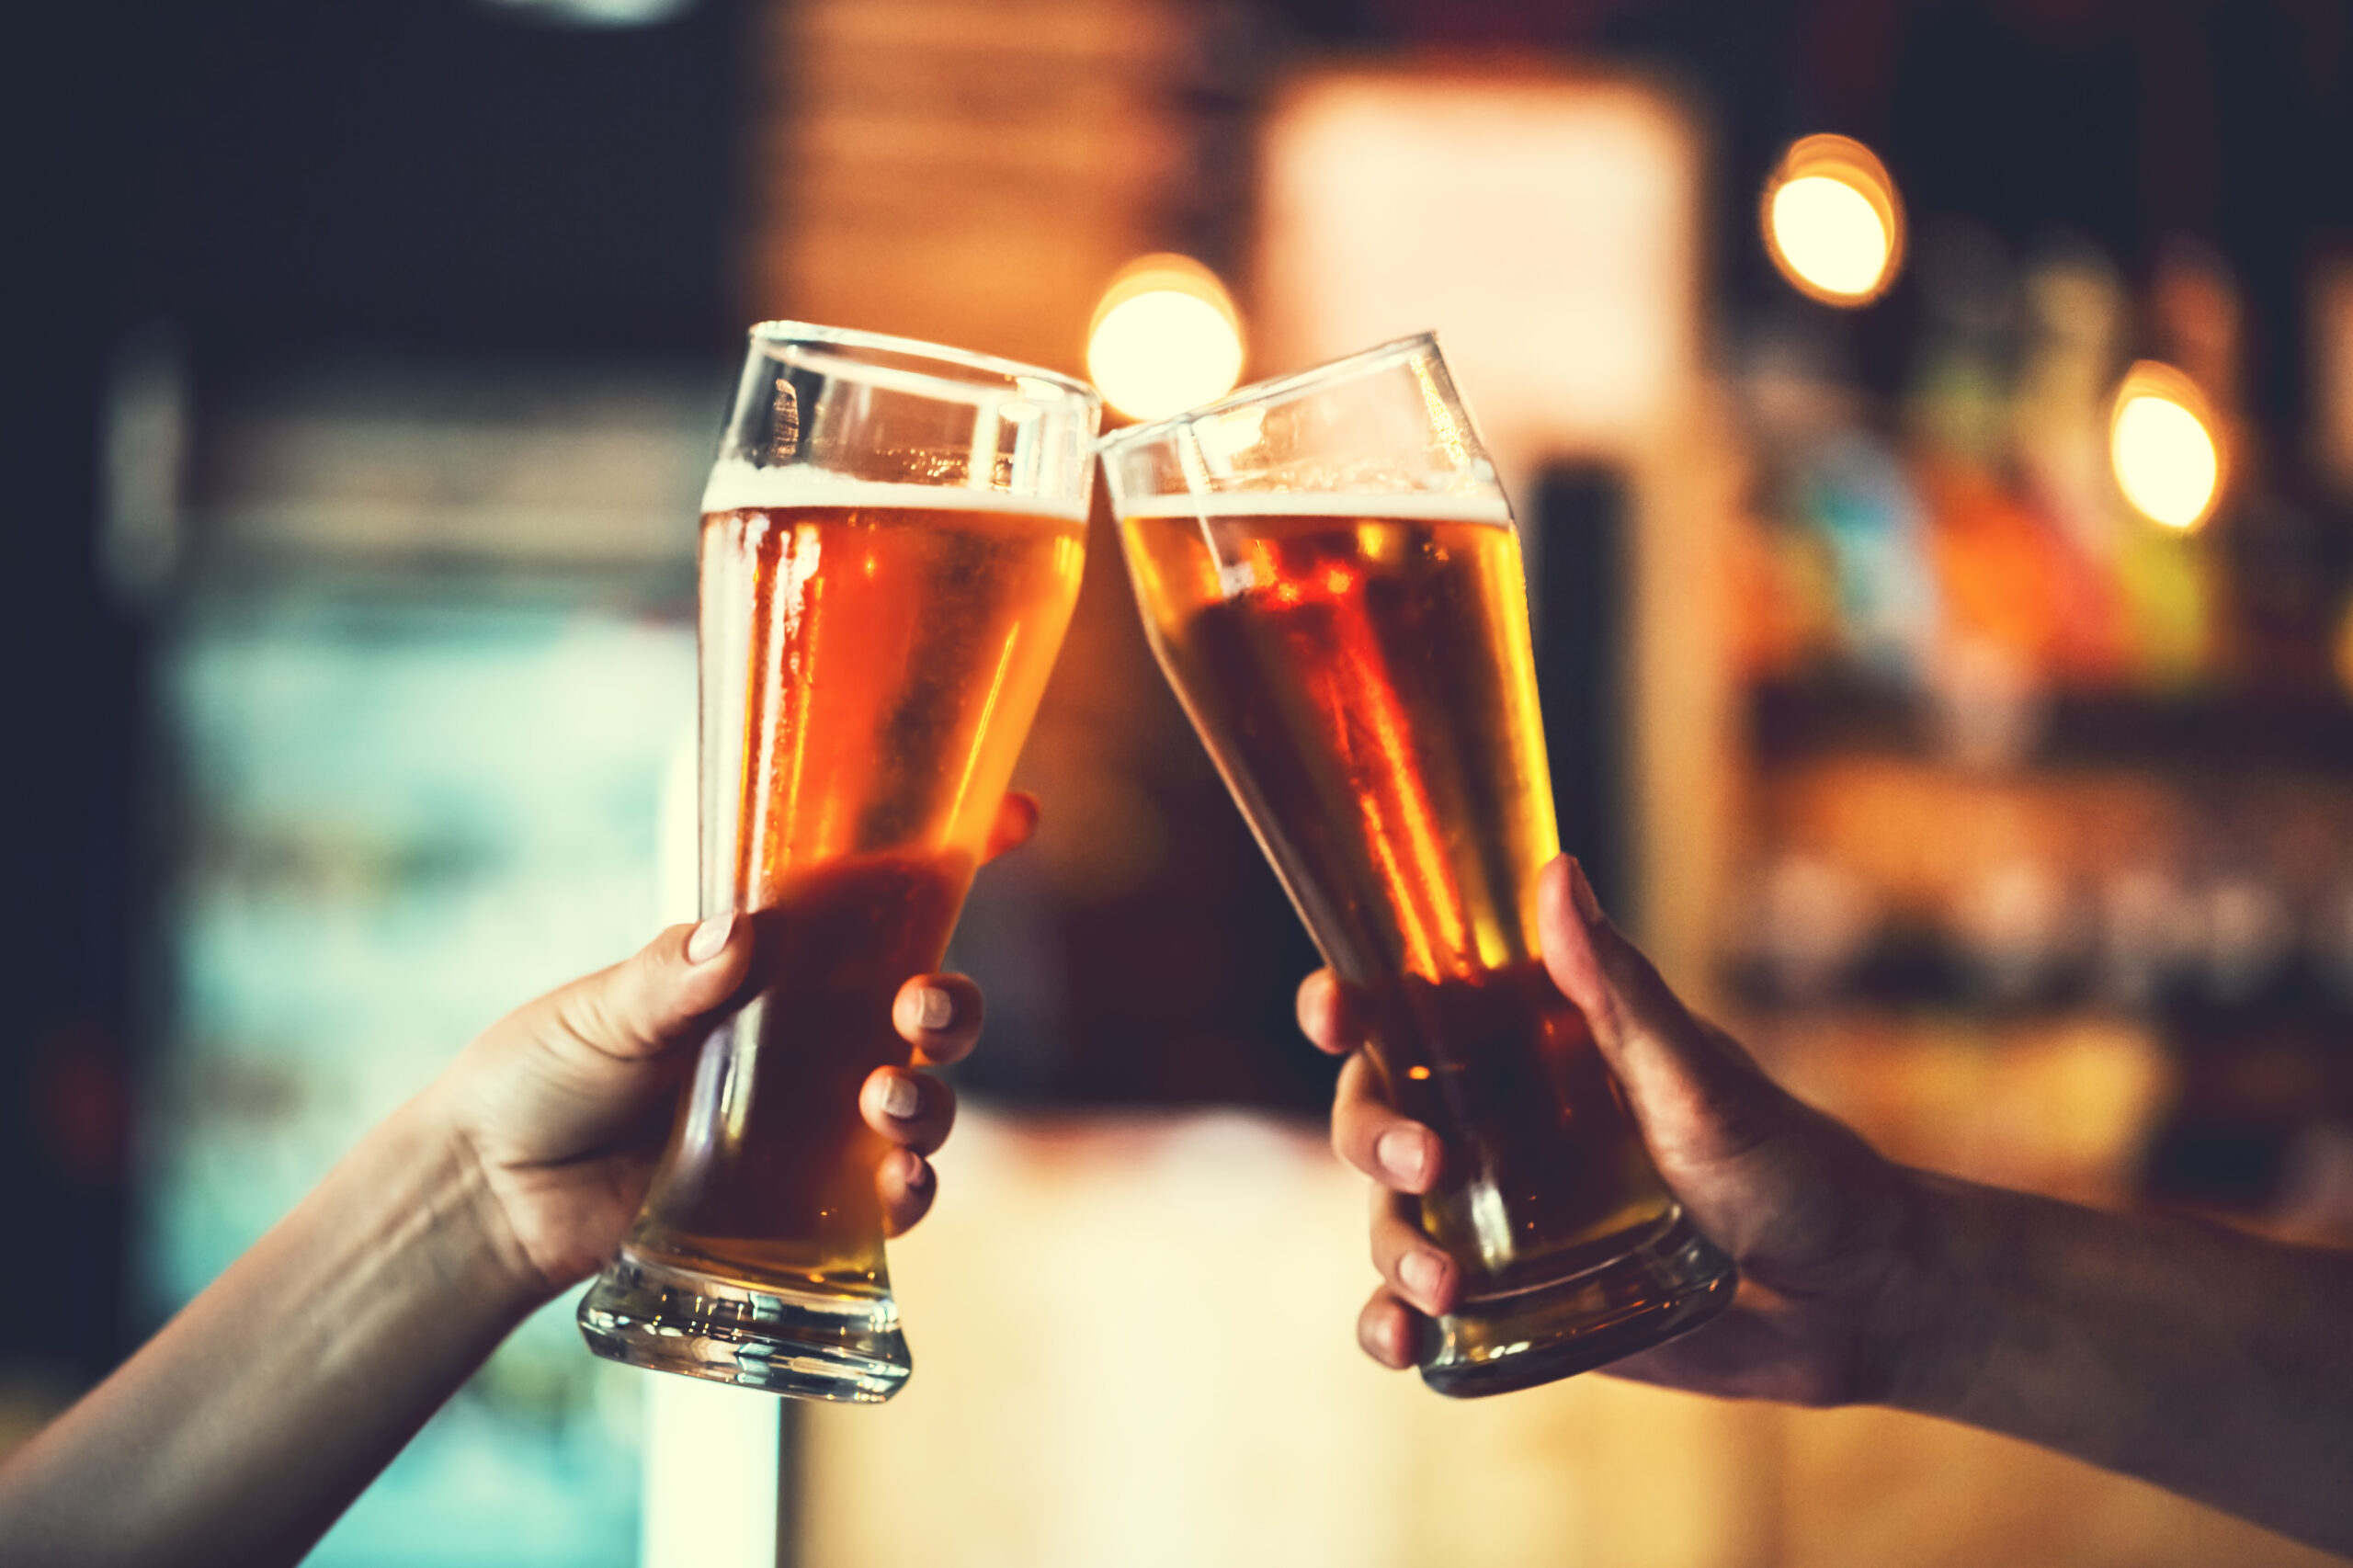 two beers being held up to toast. craft breweries are among the best things to do in bend or